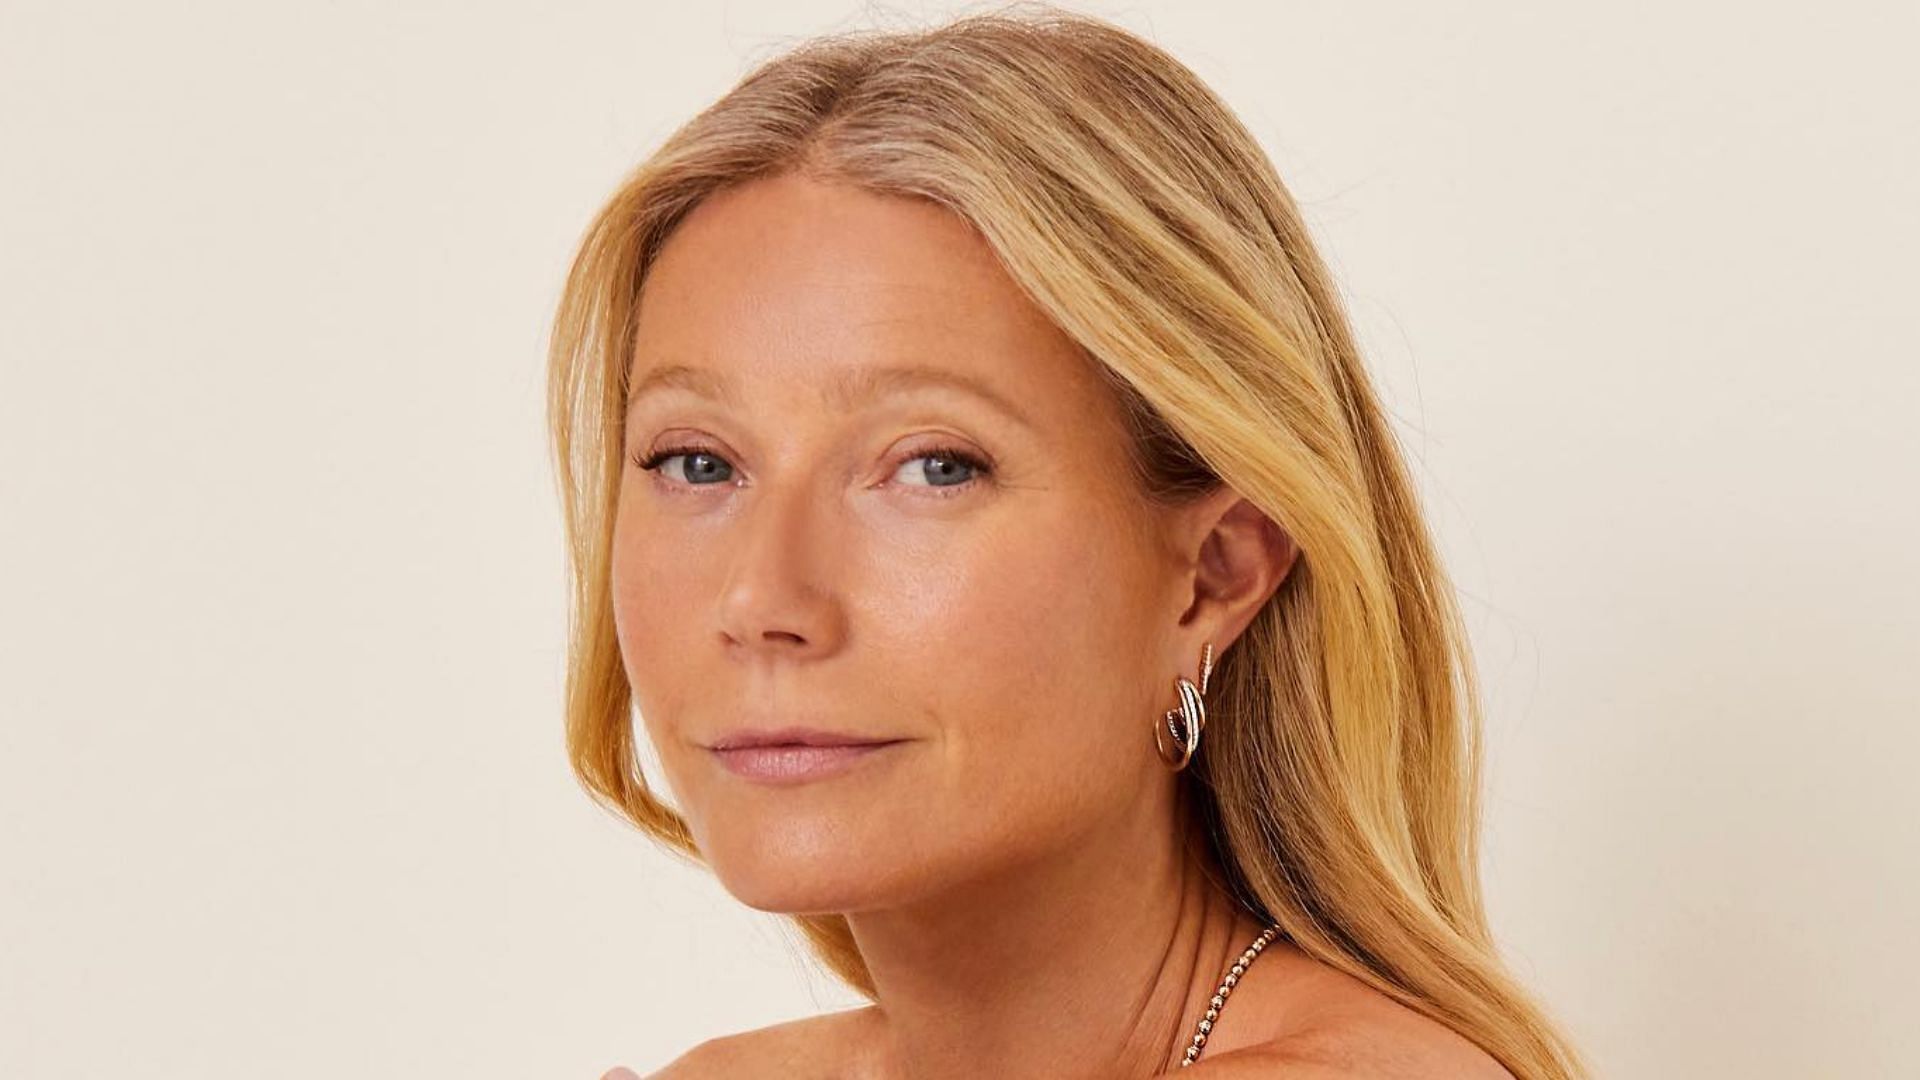 How rich is Paltrow? Actress’ rumored net worth explored as she